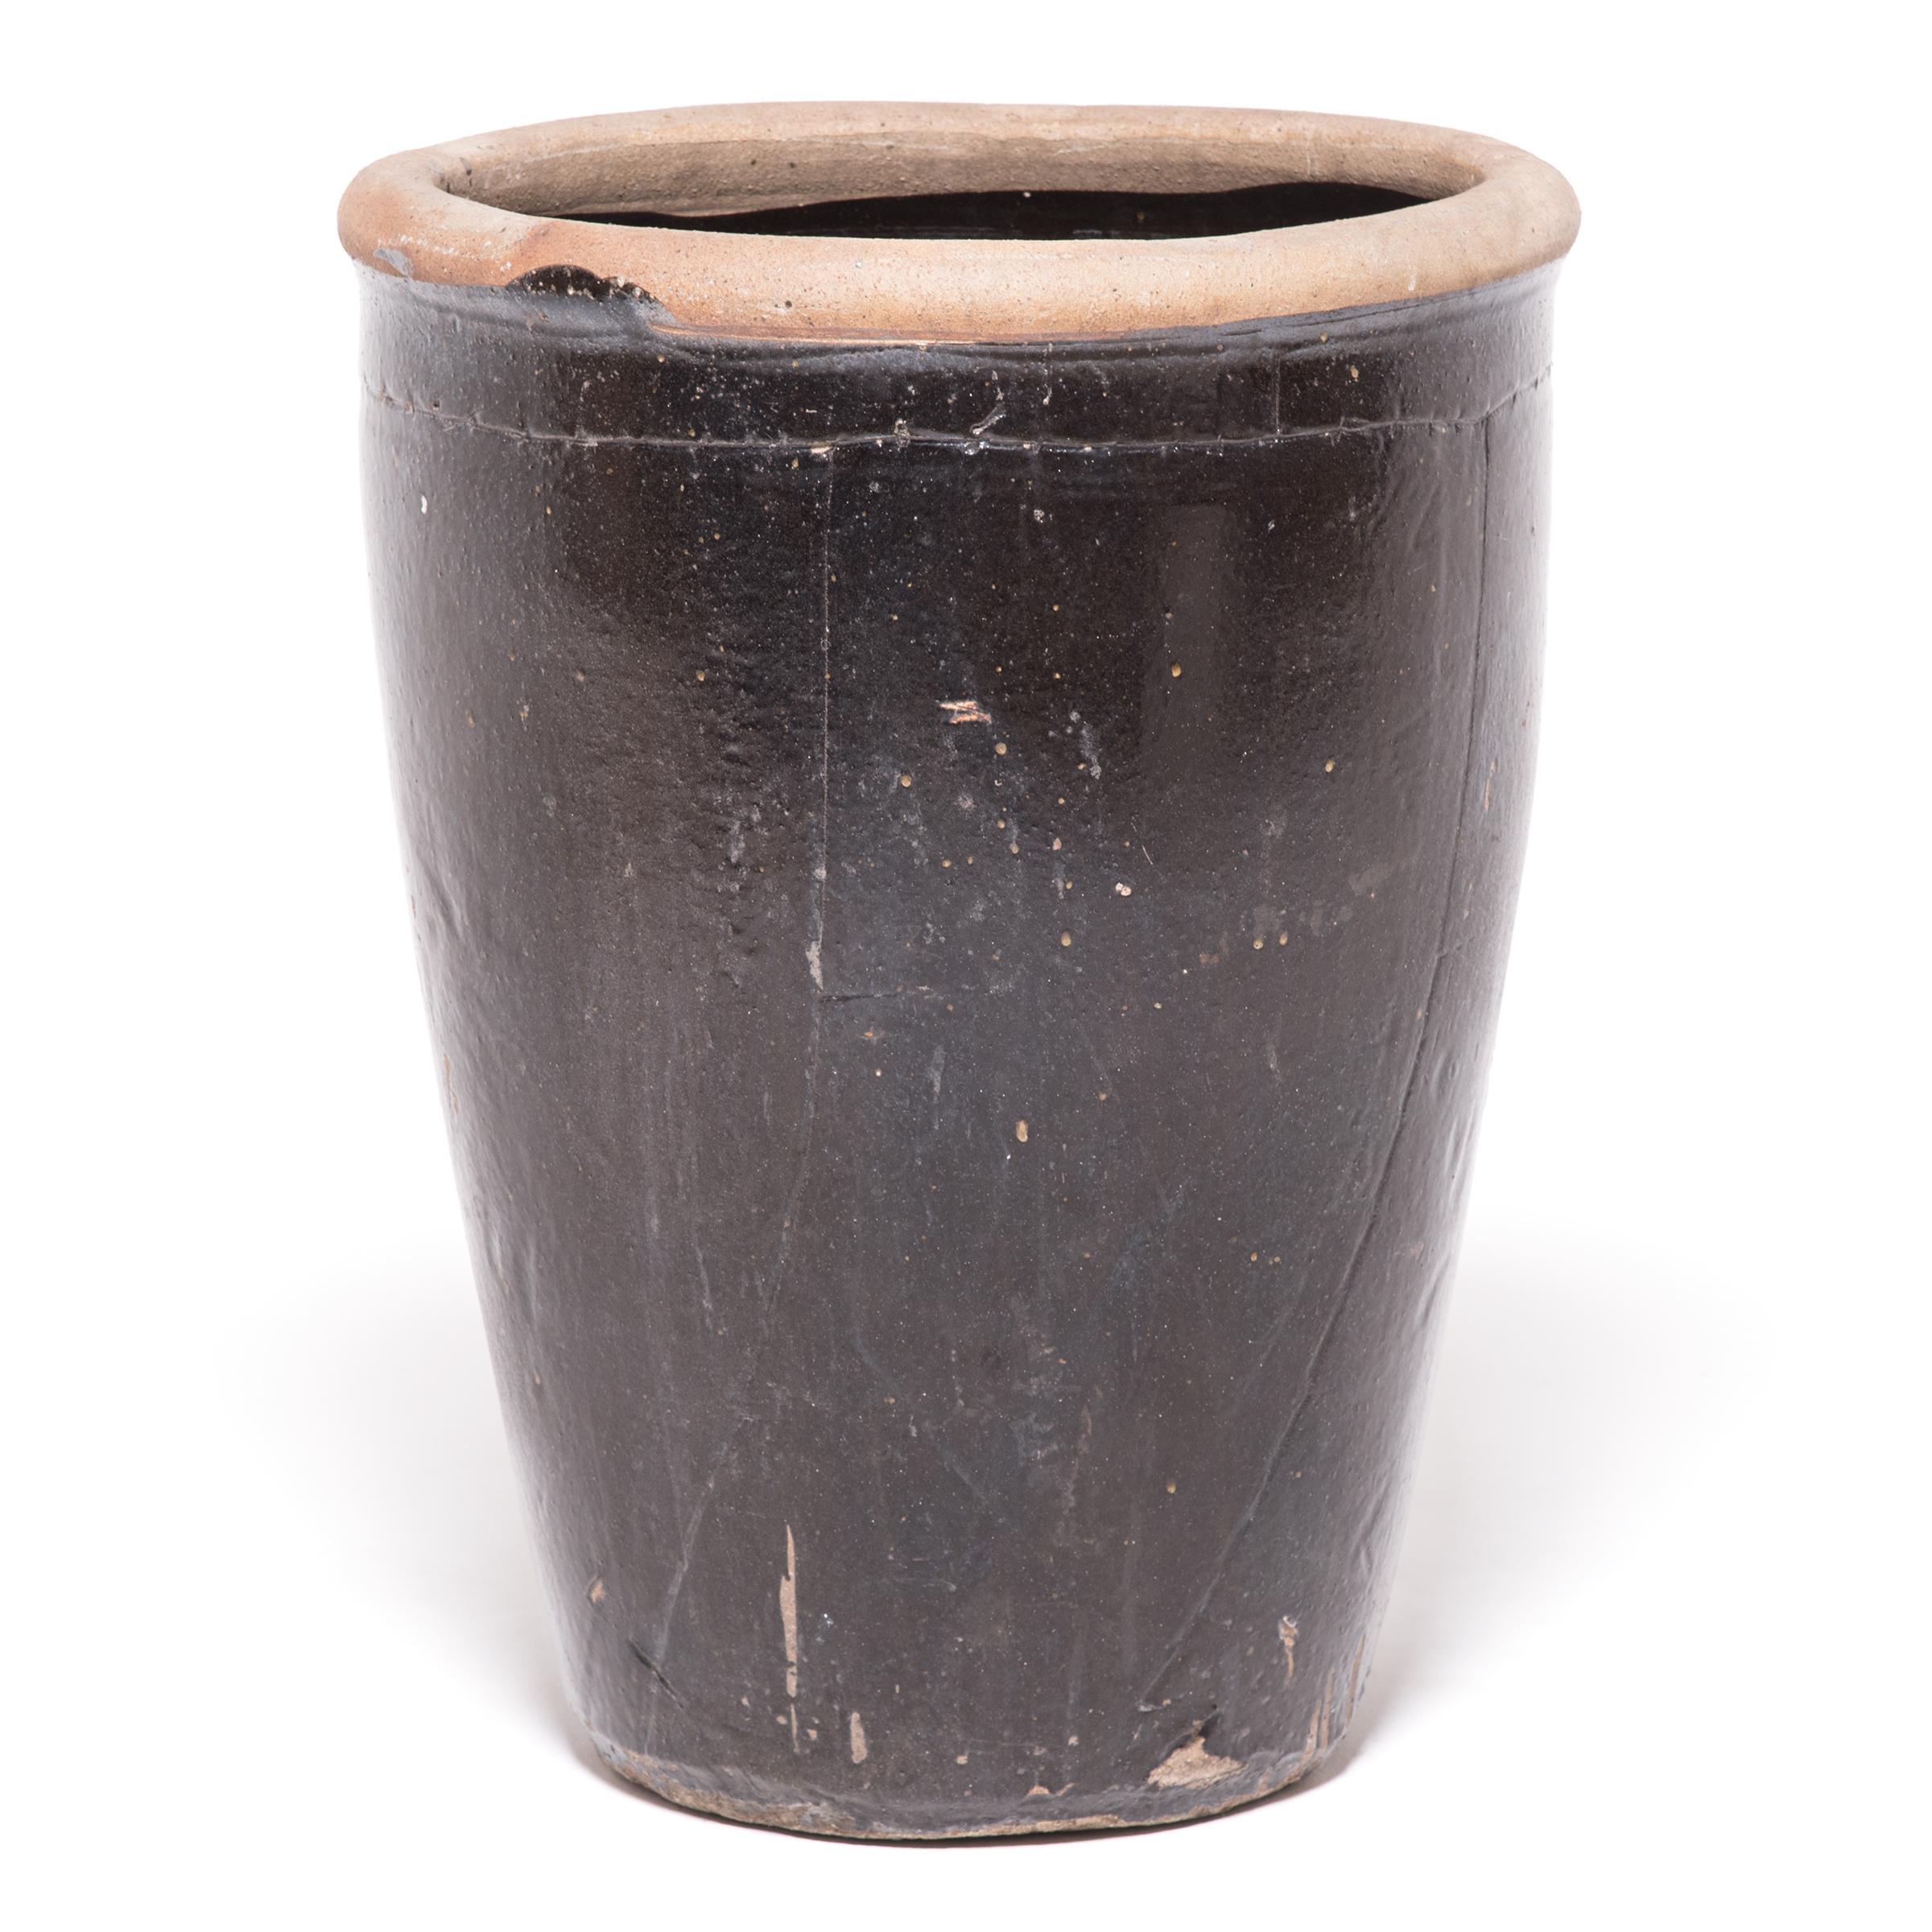 Originally used for pickling and storing various foods, this tall ceramic jar features a strikingly dark glaze. Set in high contrast by an unglazed lip and speckled with imperfections, the glazed surface exudes a rich luster and makes this jar the